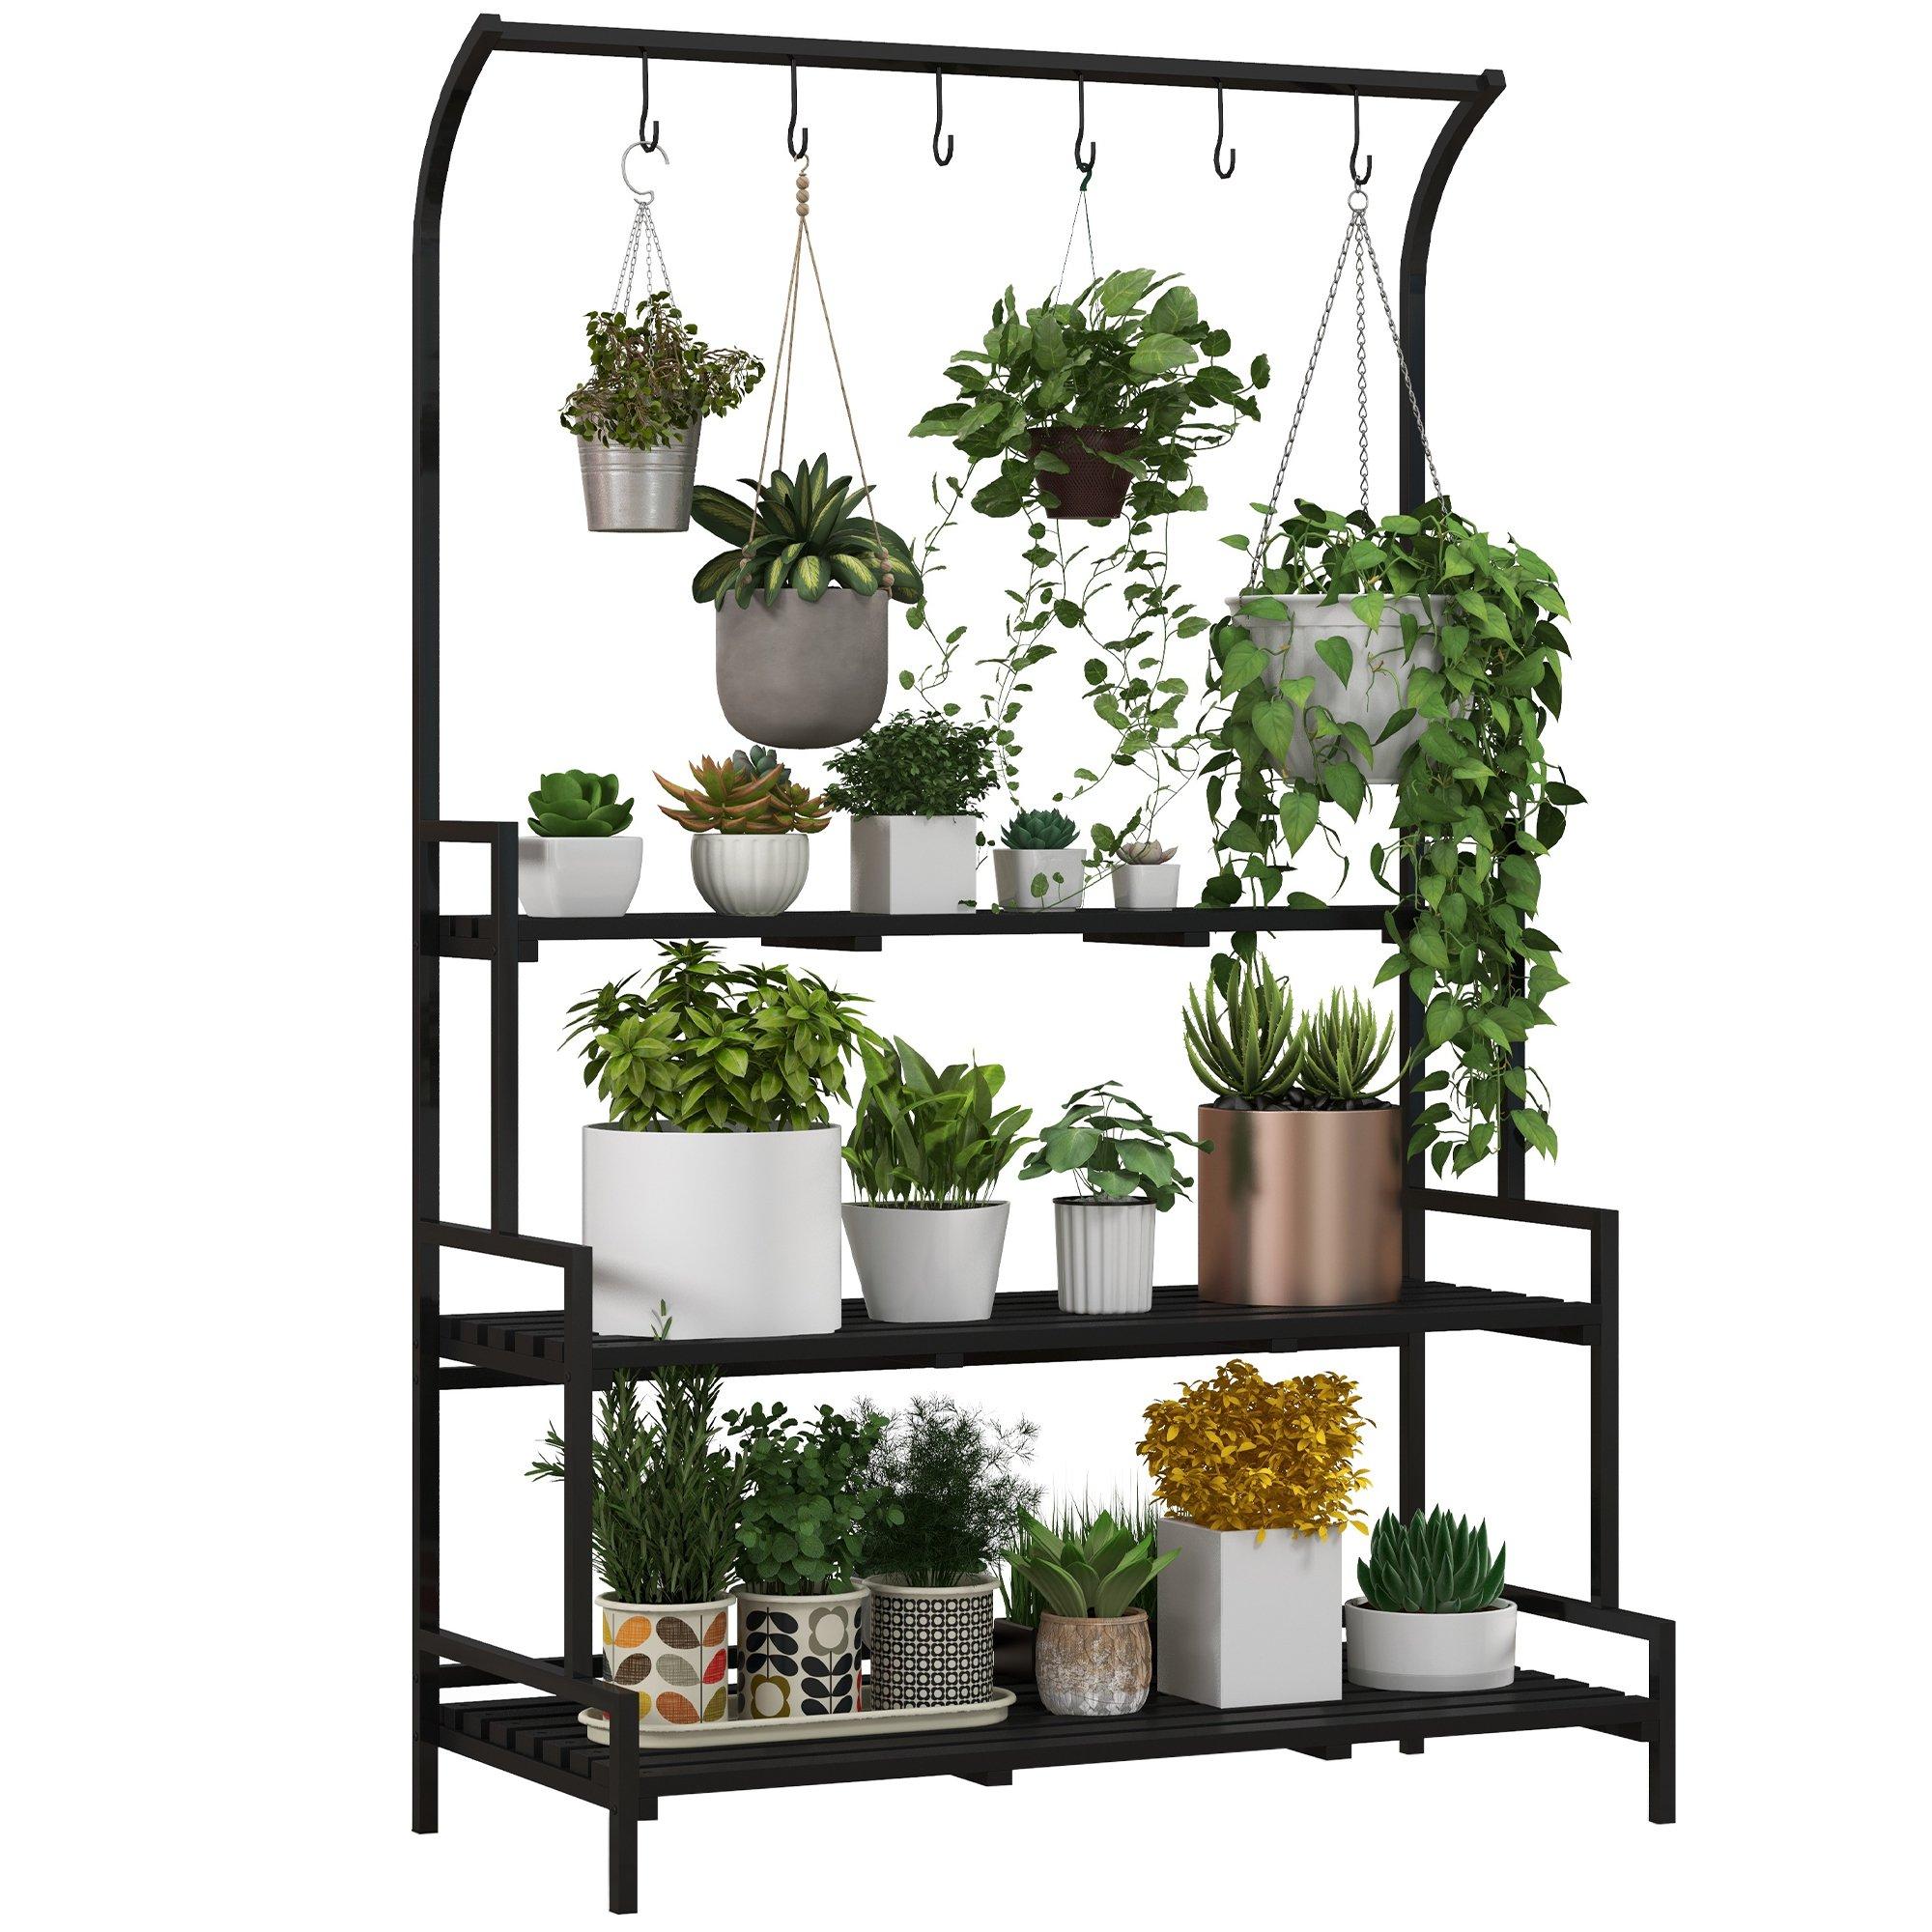 3 Tiered Plant Stand Ladder Shelf with Hanging Hooks for Indoor Outdoor Use